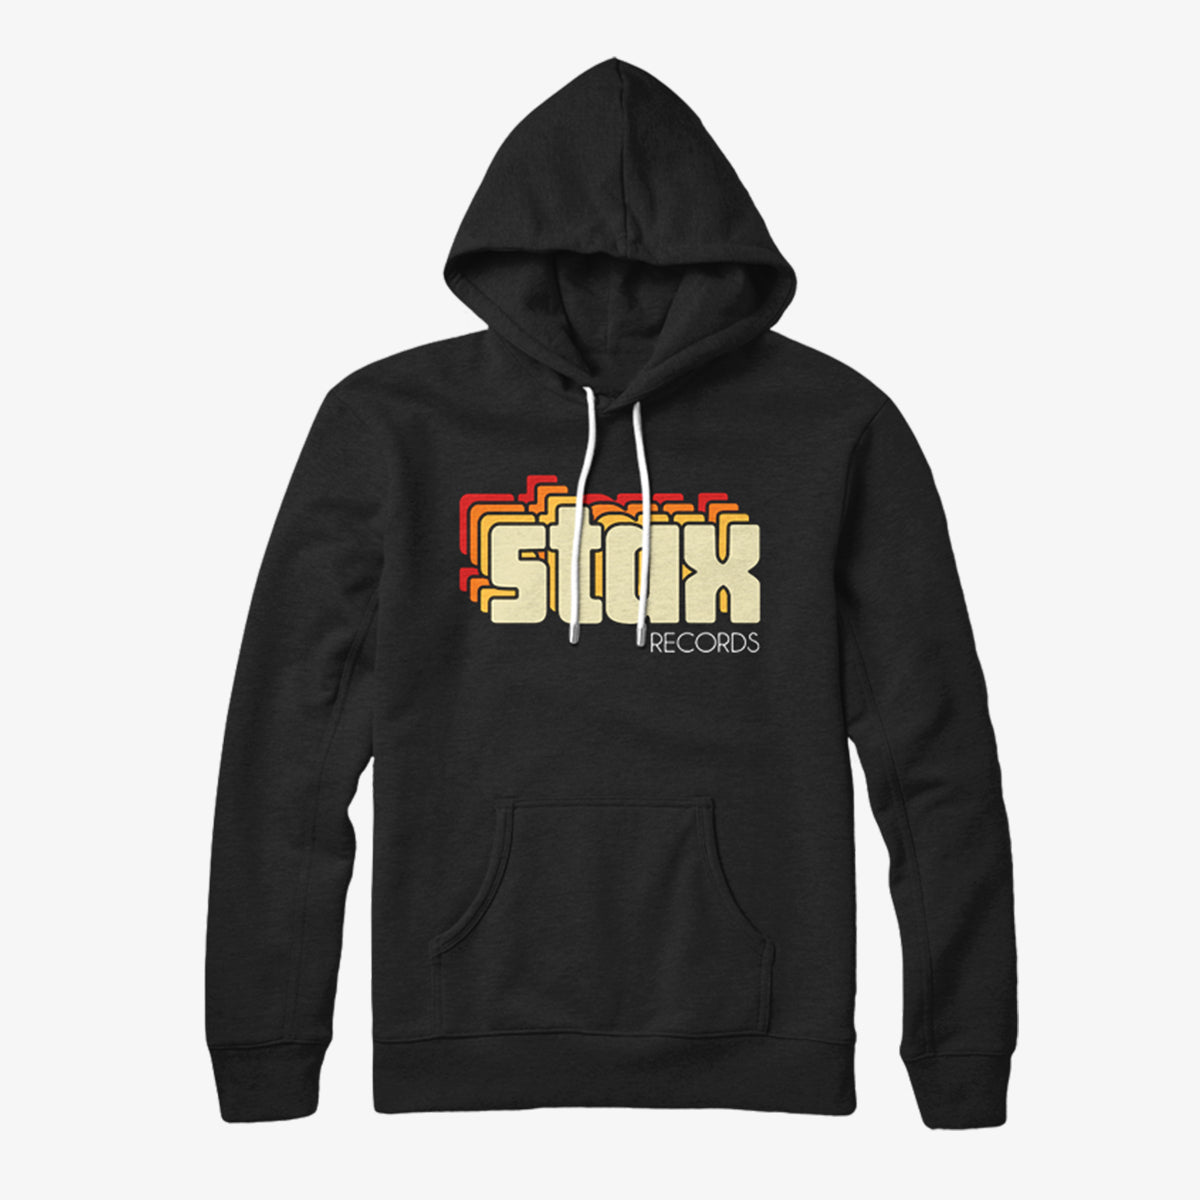 Stax Records - Stax Vintage Hoodie (Black) - Stax Records